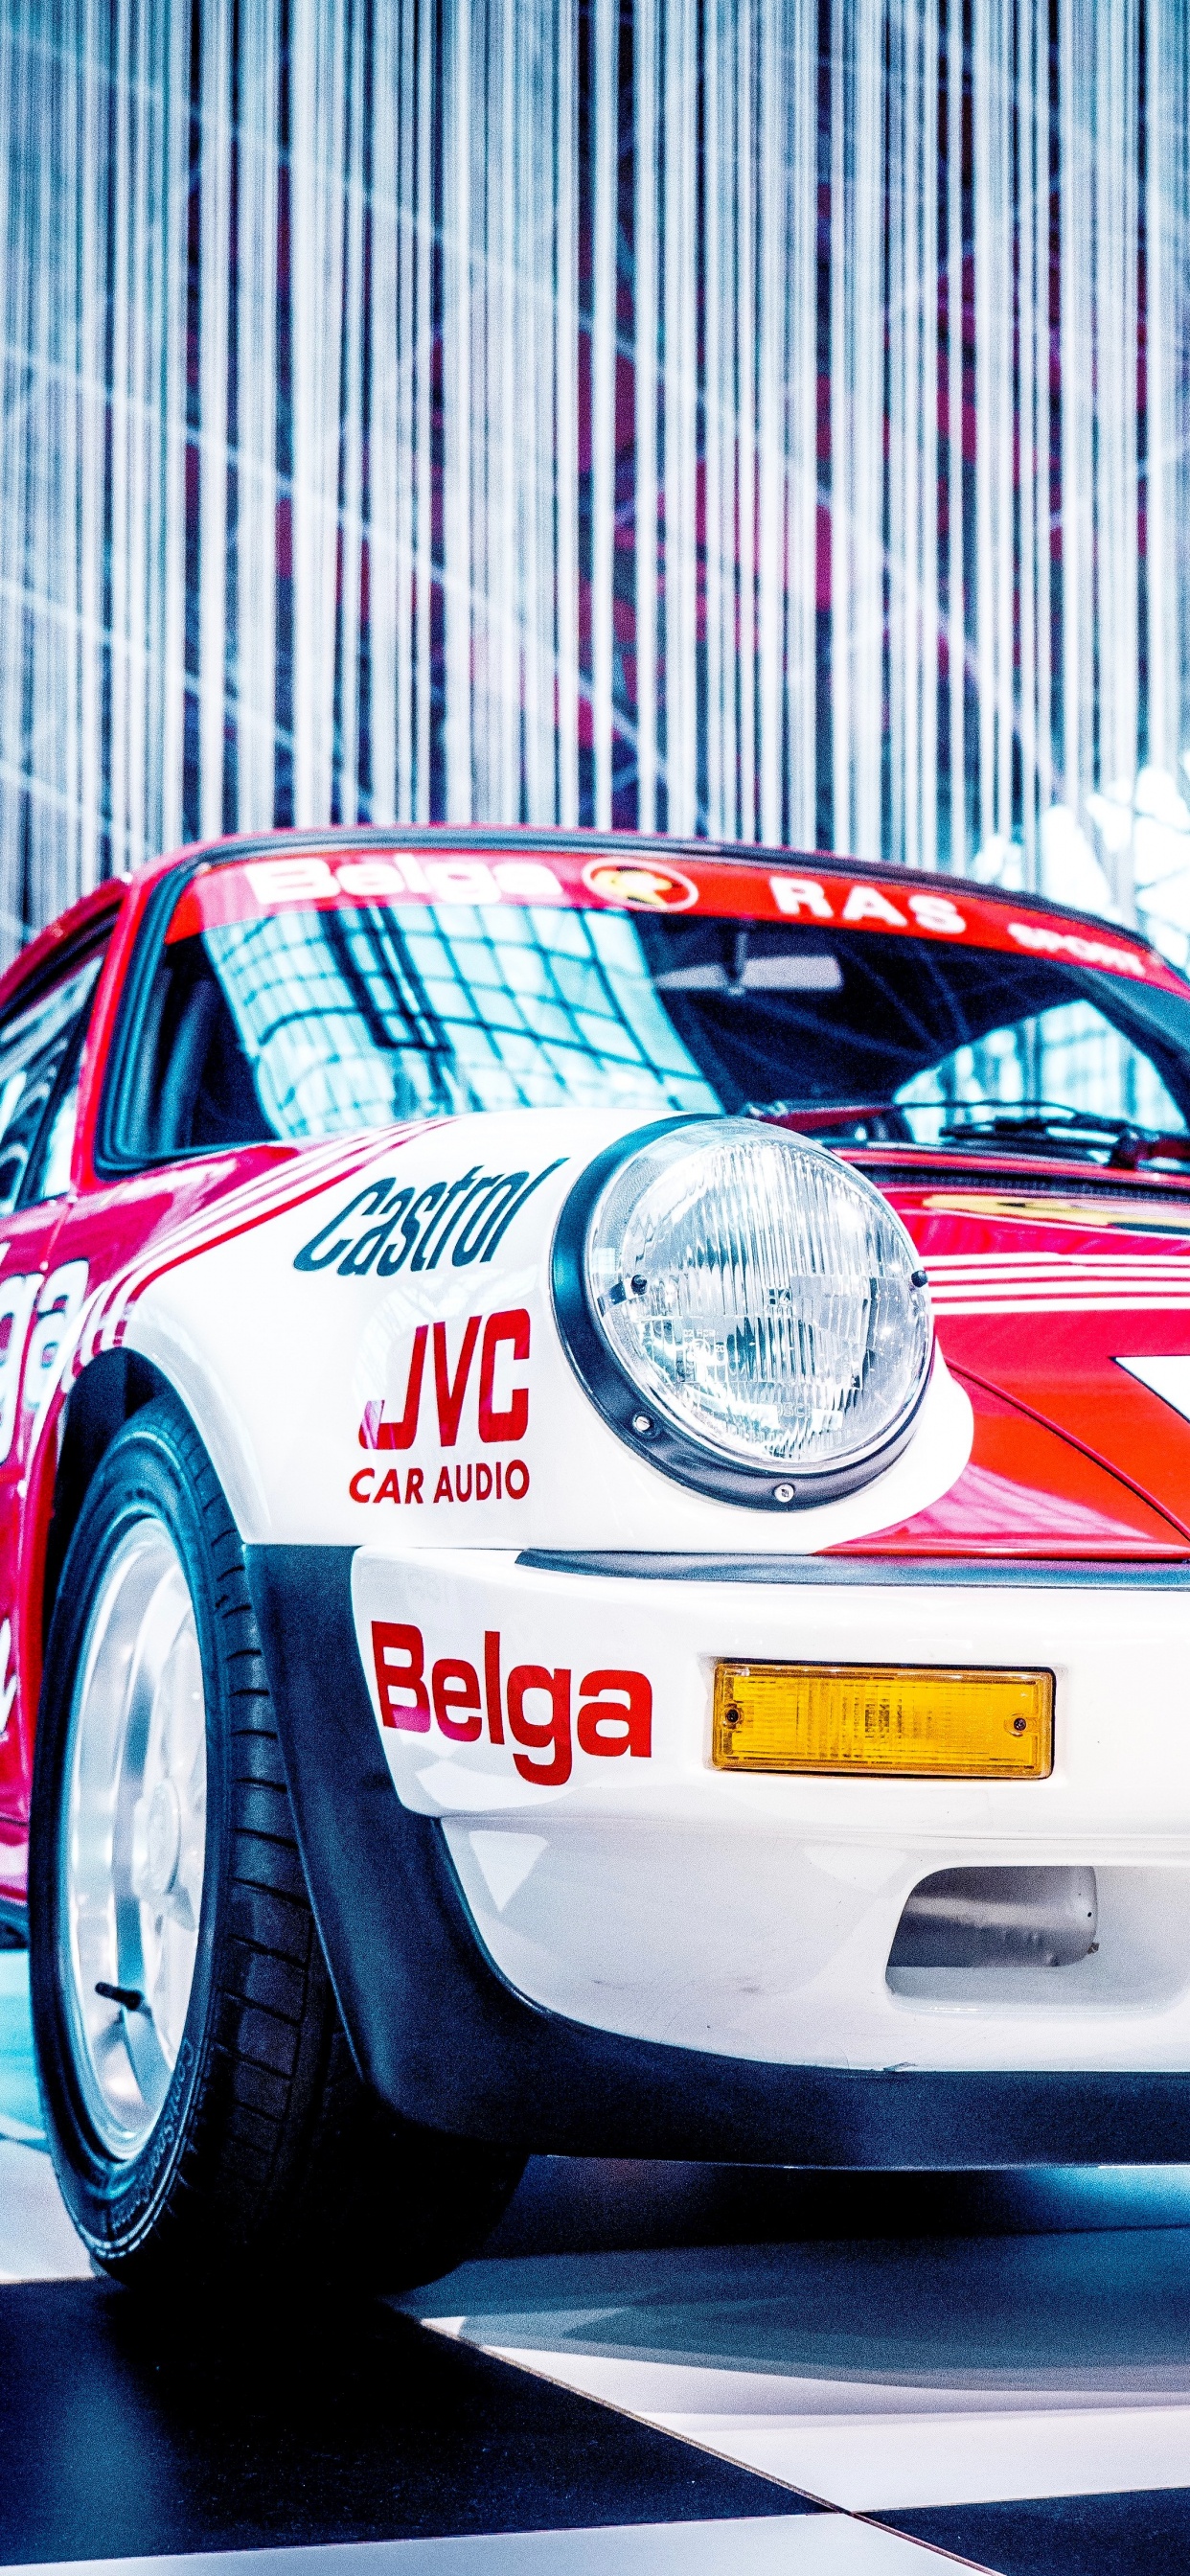 White and Red Porsche 911. Wallpaper in 1242x2688 Resolution